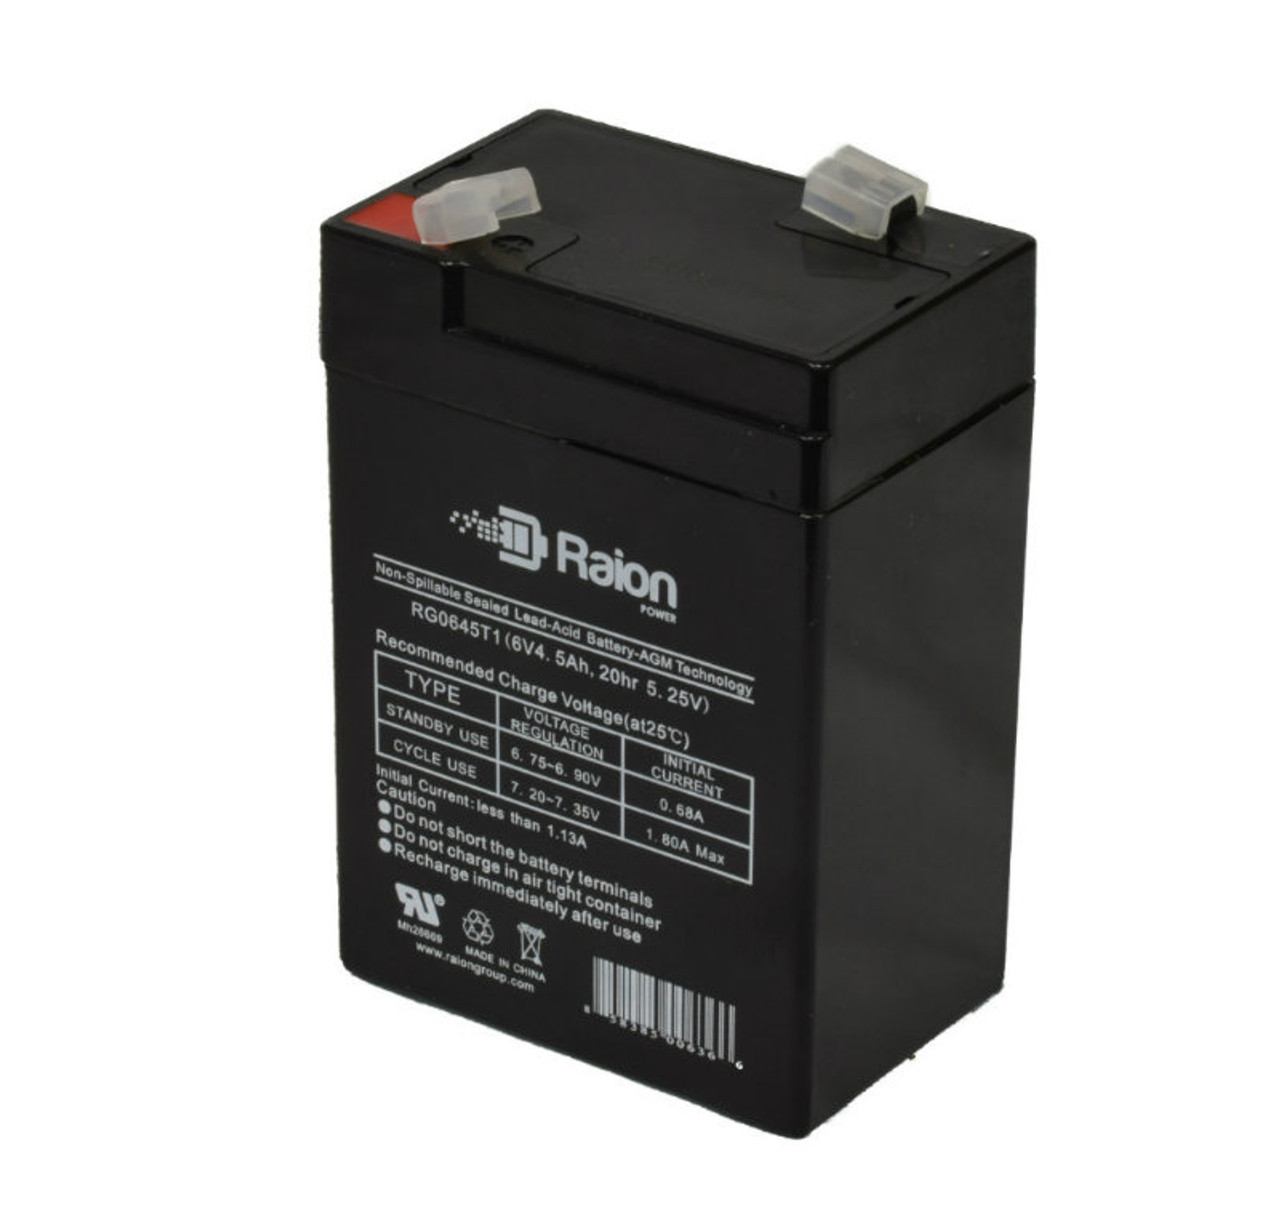 Raion Power RG0645T1 6V 4.5Ah Replacement Battery Cartridge for Holophane 92804